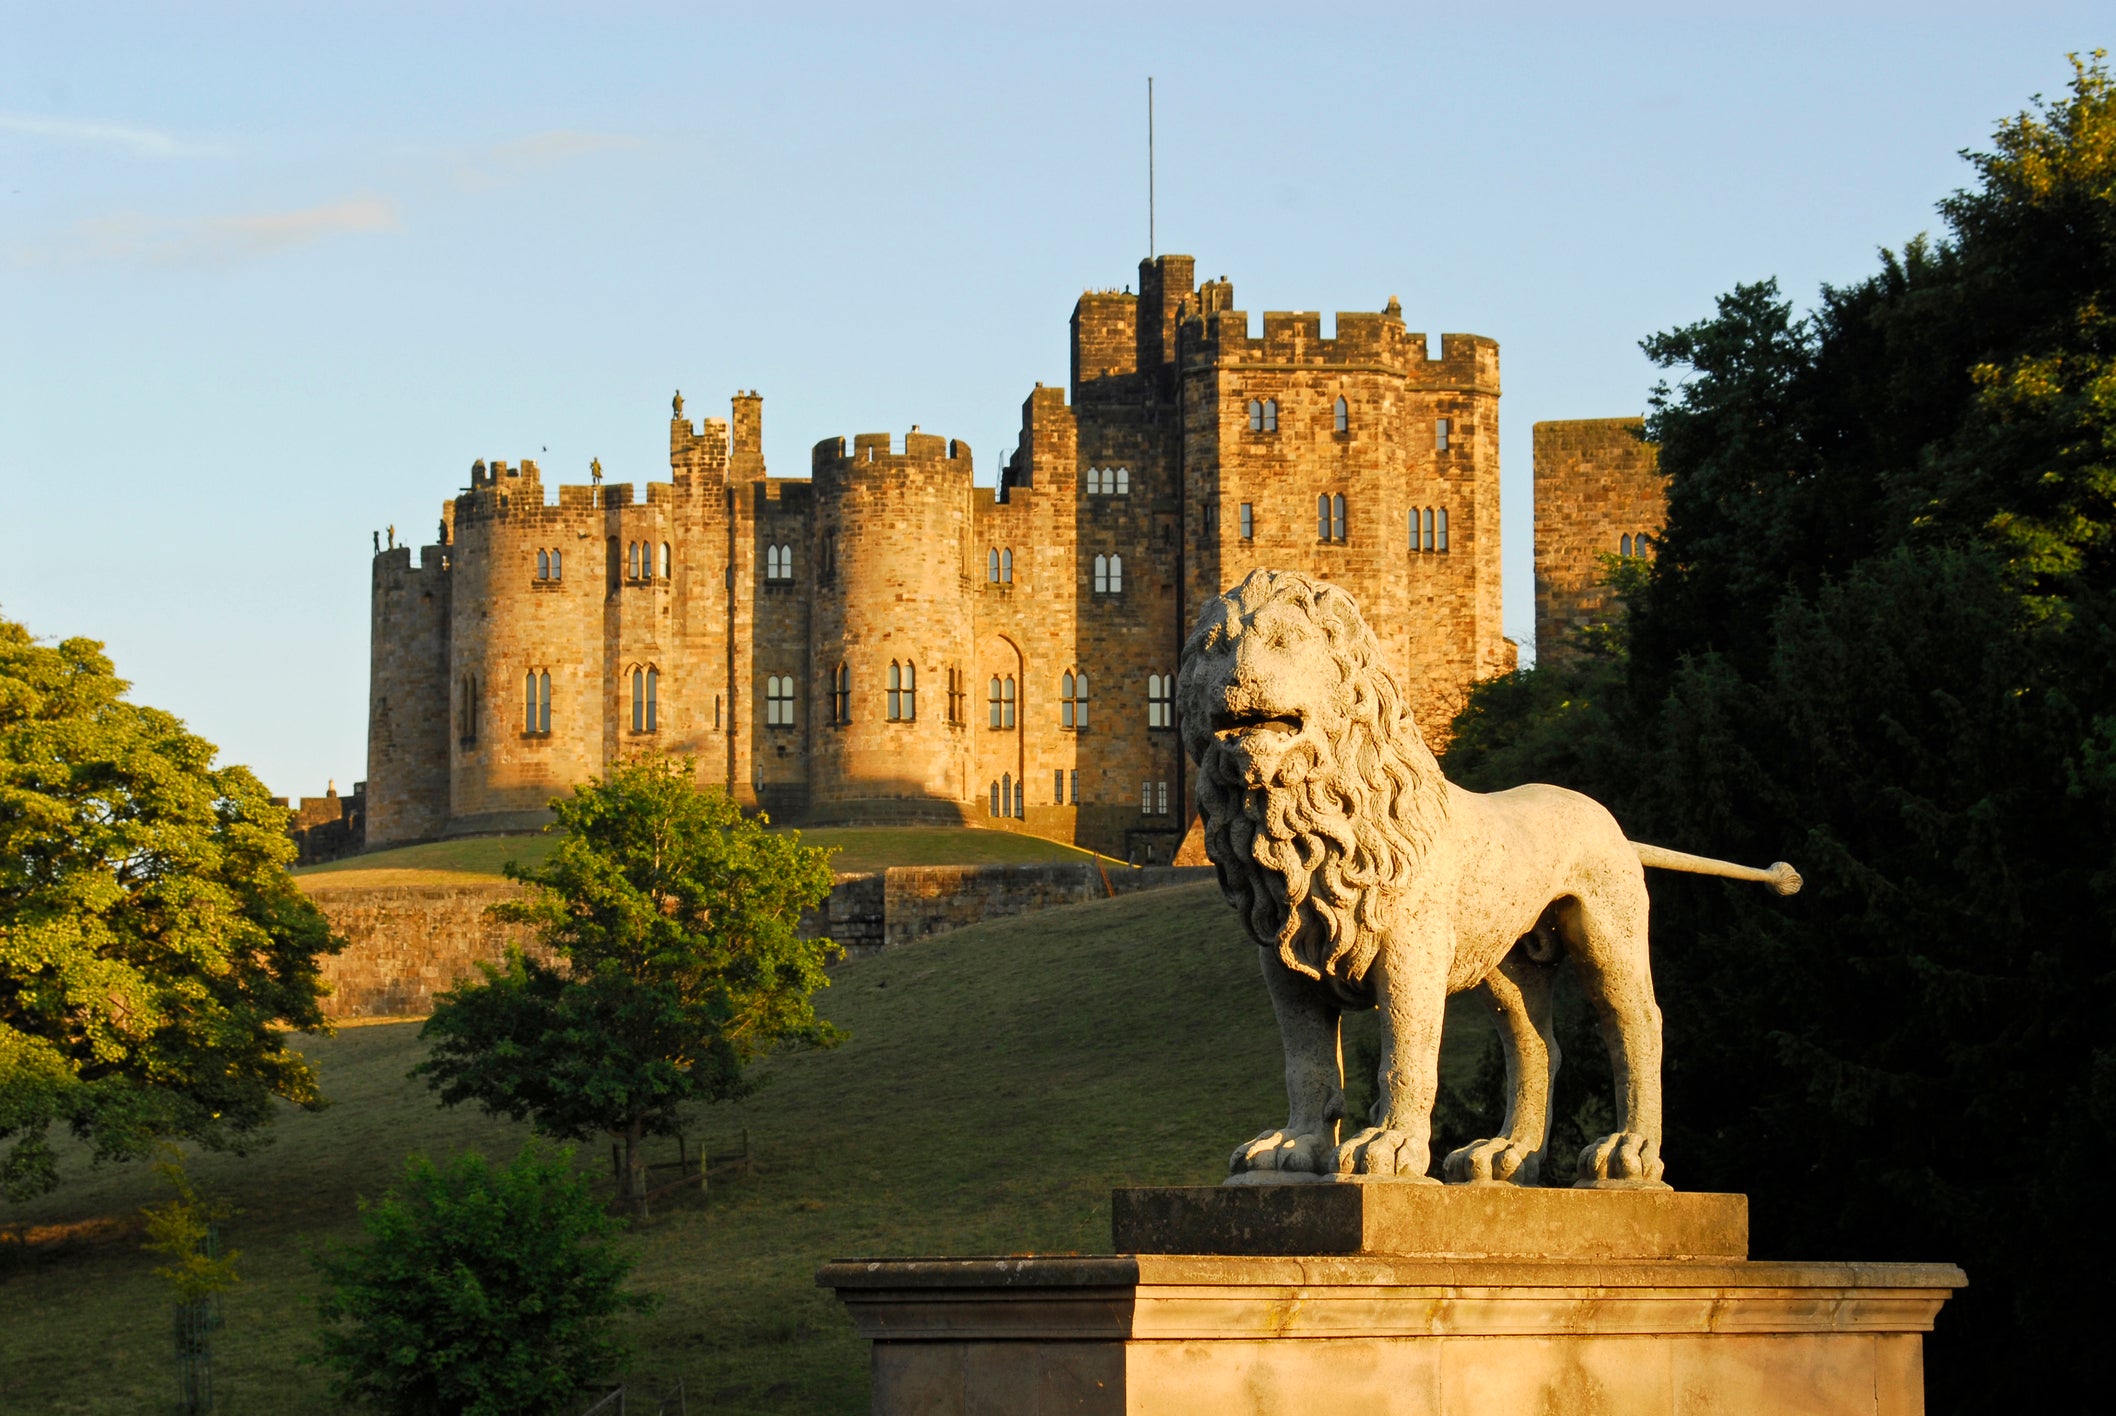 Magic moments: Alnwick Castle, filming location for Harry Potter